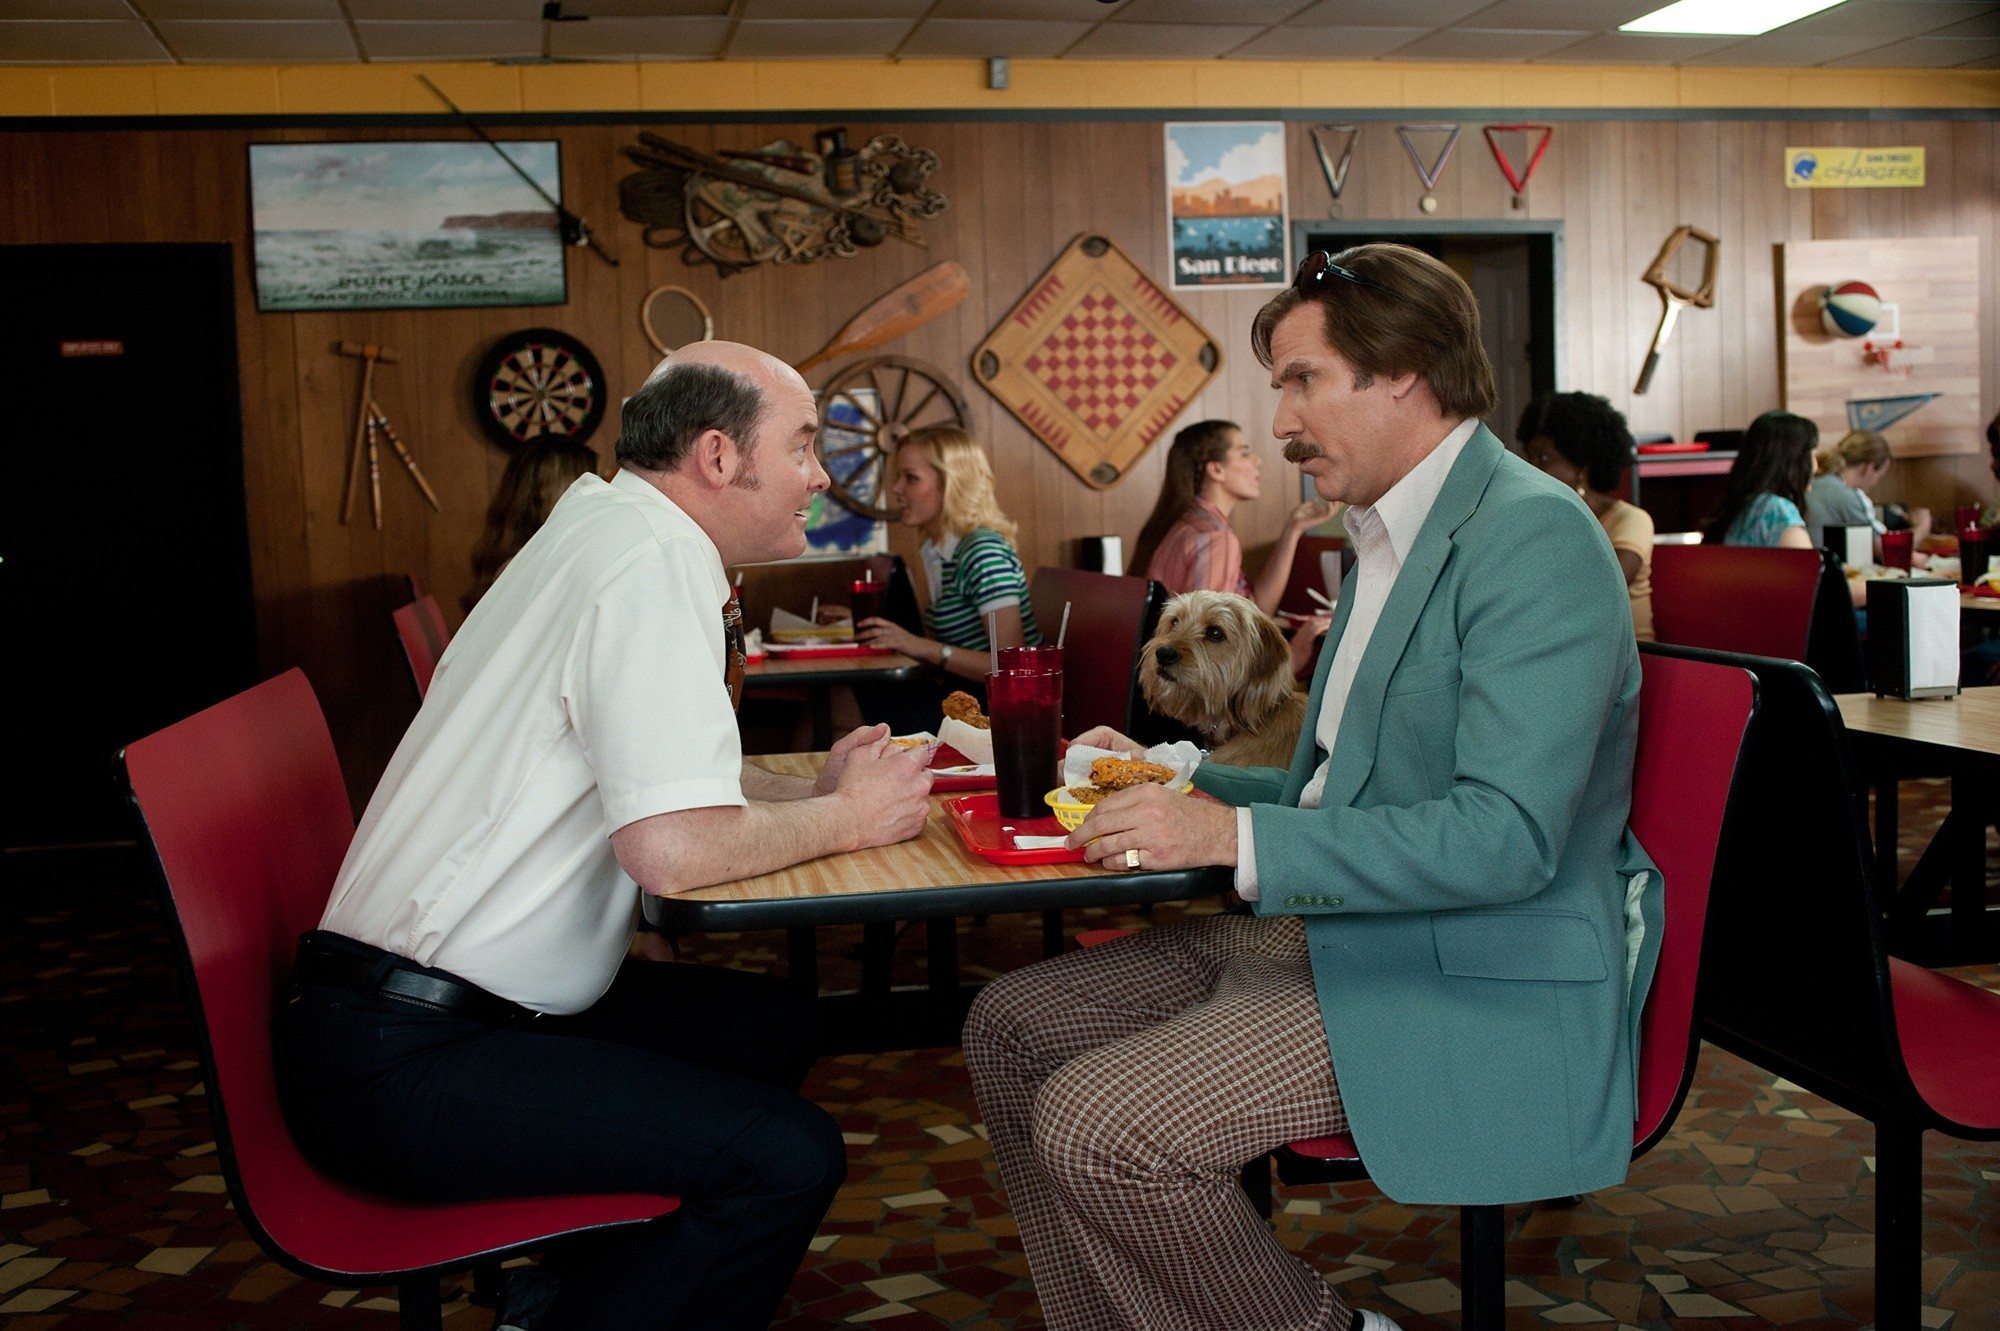 David Koechner stars as Champ Kind and Will Ferrell stars as Ron Burgundy in Paramount Pictures' Anchorman: The Legend Continues (2013)